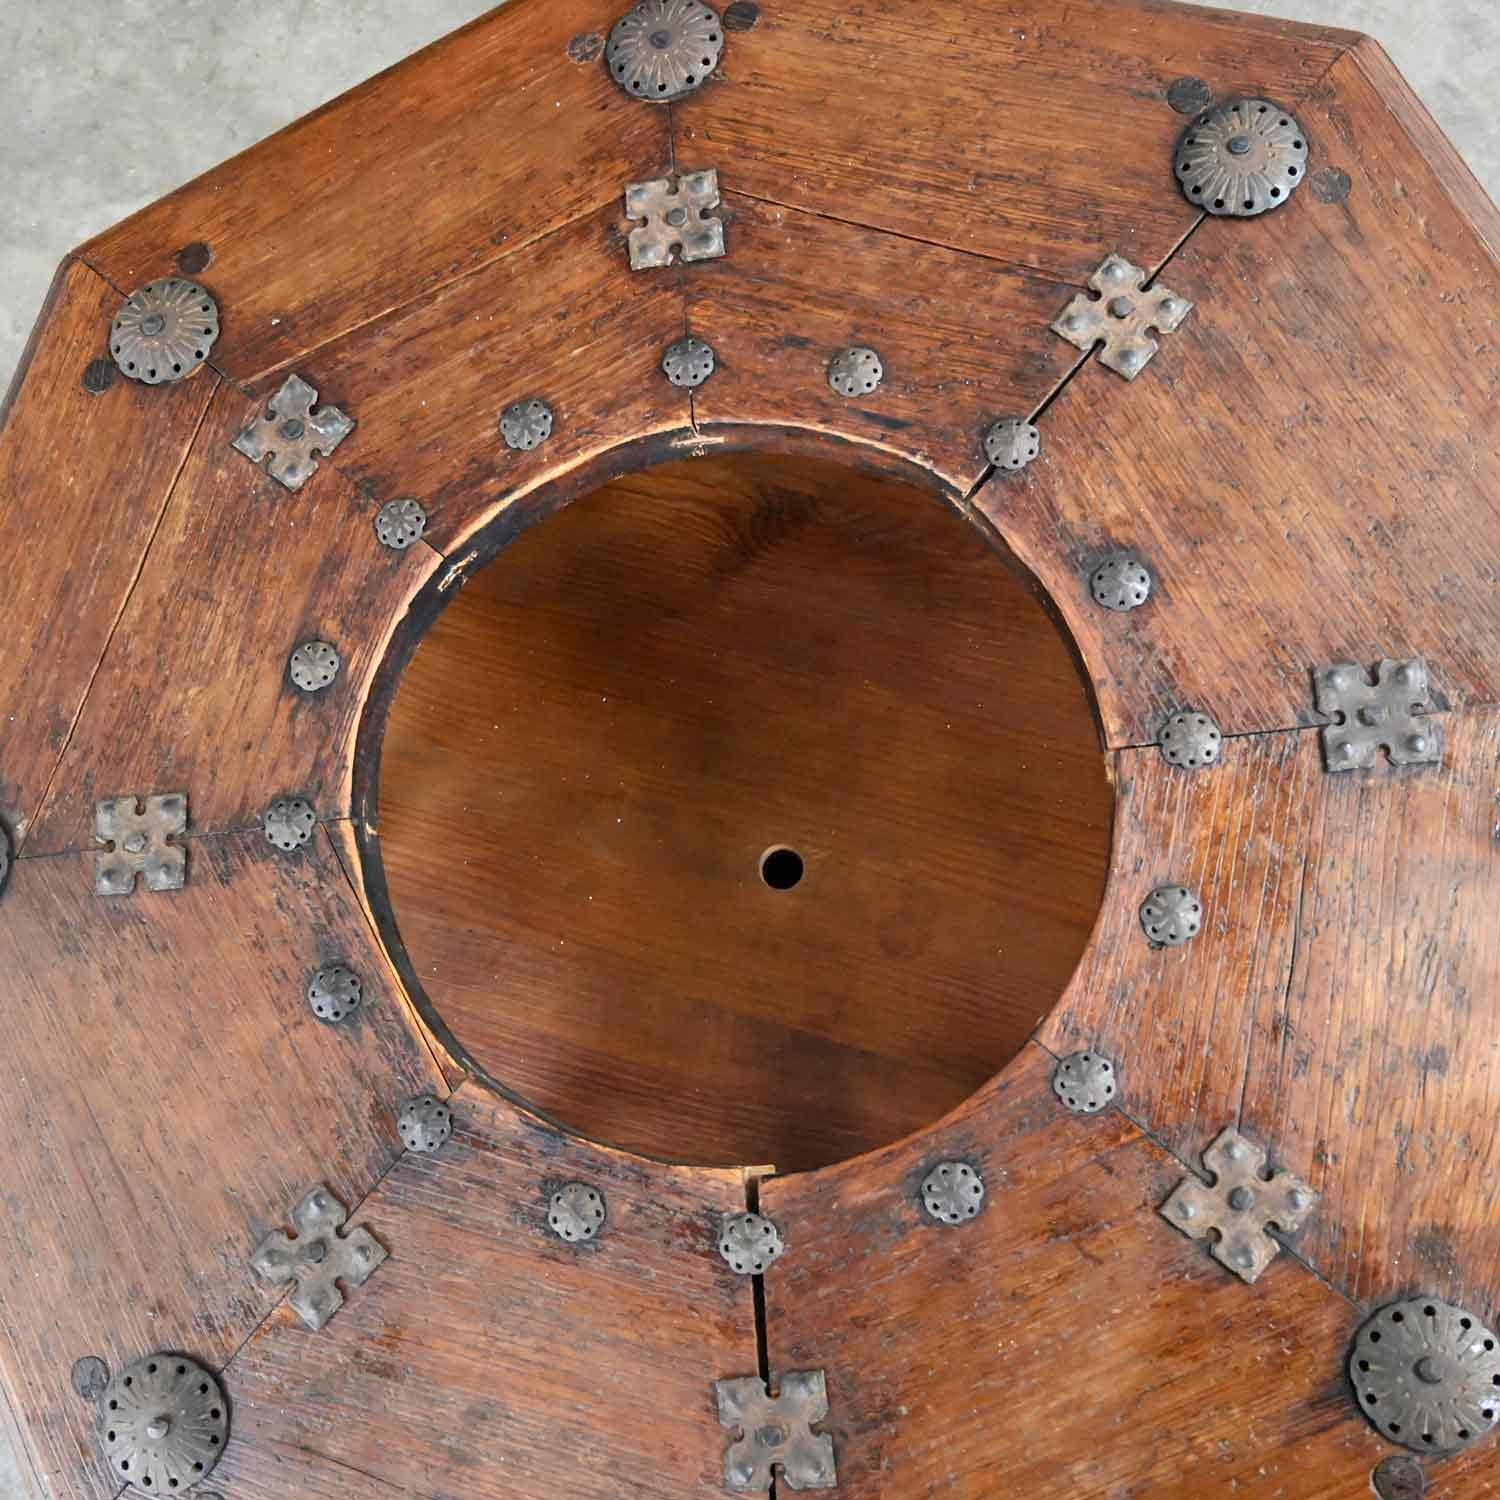 Spanish Colonial Revival Rustic Octagon Brazier Coffee Table Style Artes De Mexi 7